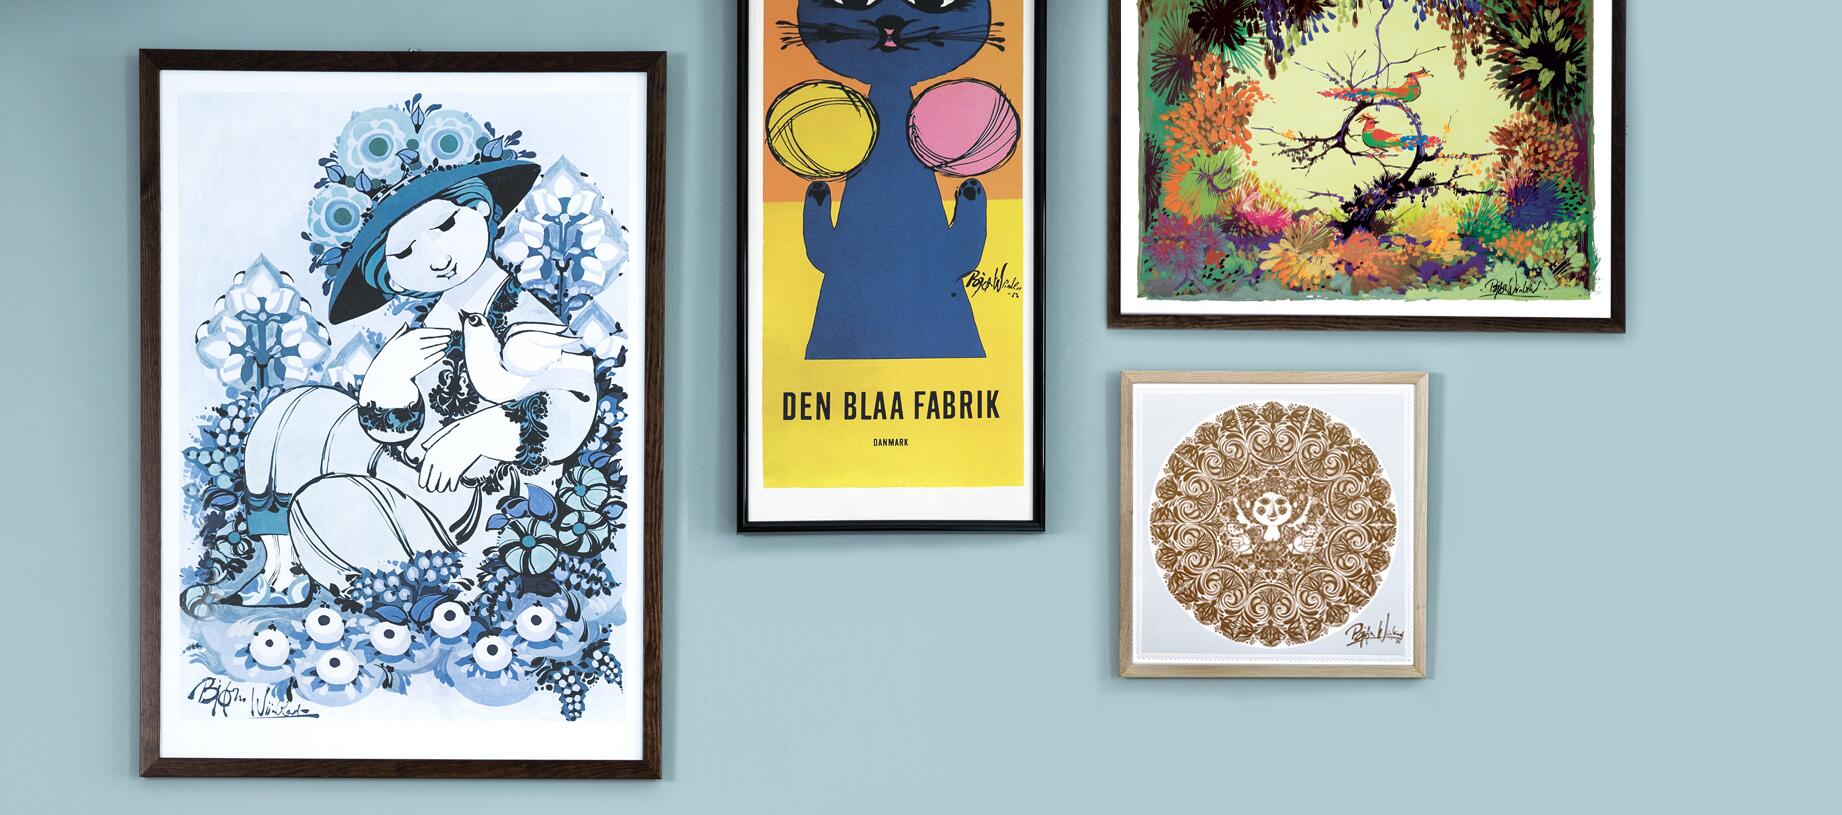 Bjørn Wiinblad posters in different colors and motifs.